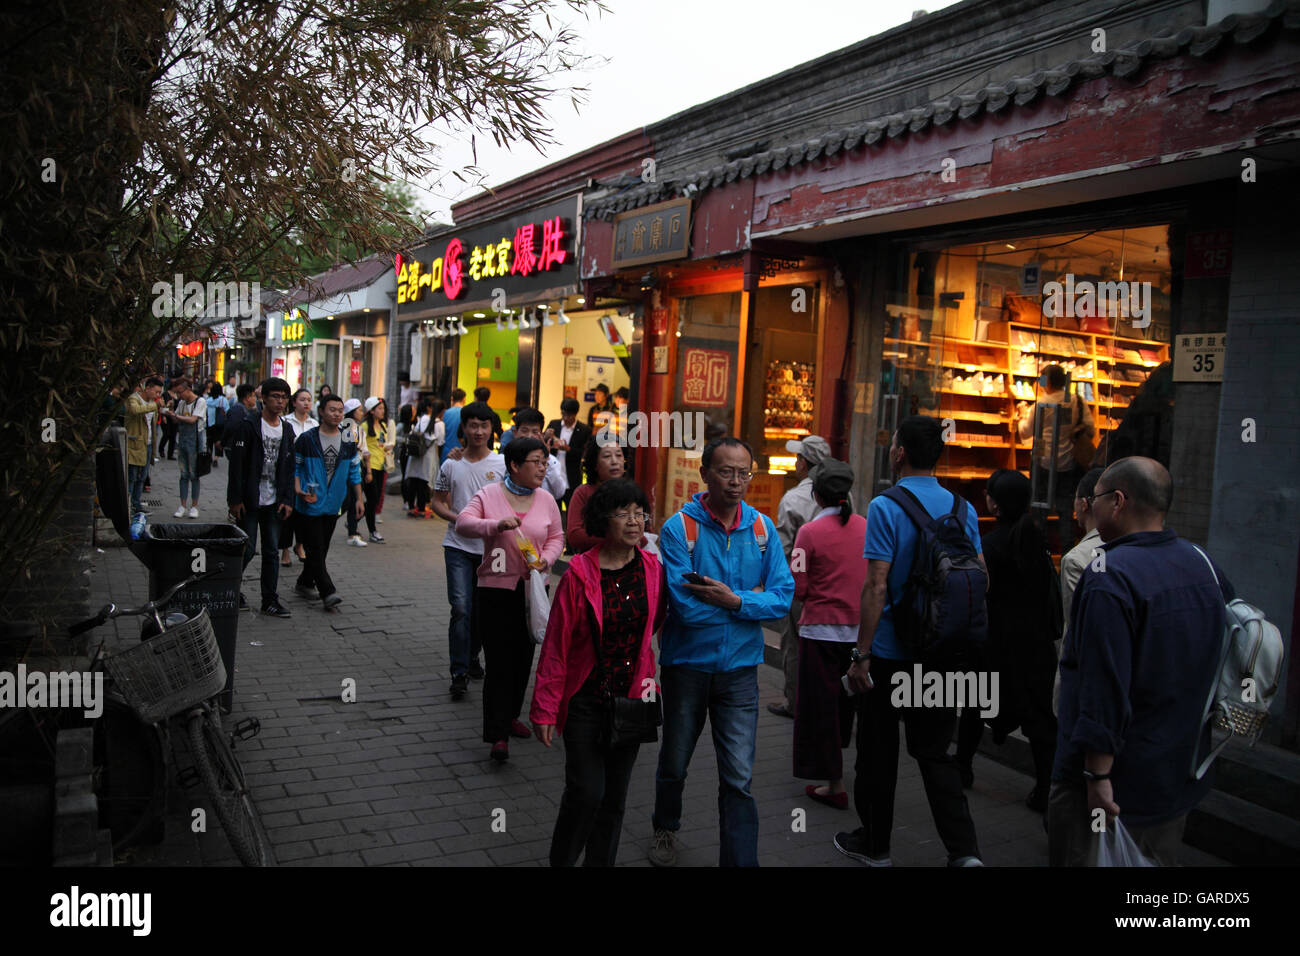 Chinese people and tourists walk in the evening in an alley of a historical hutong with lots of small shops. Nanluoguxiang Hutong, Beijing, China. Stock Photo